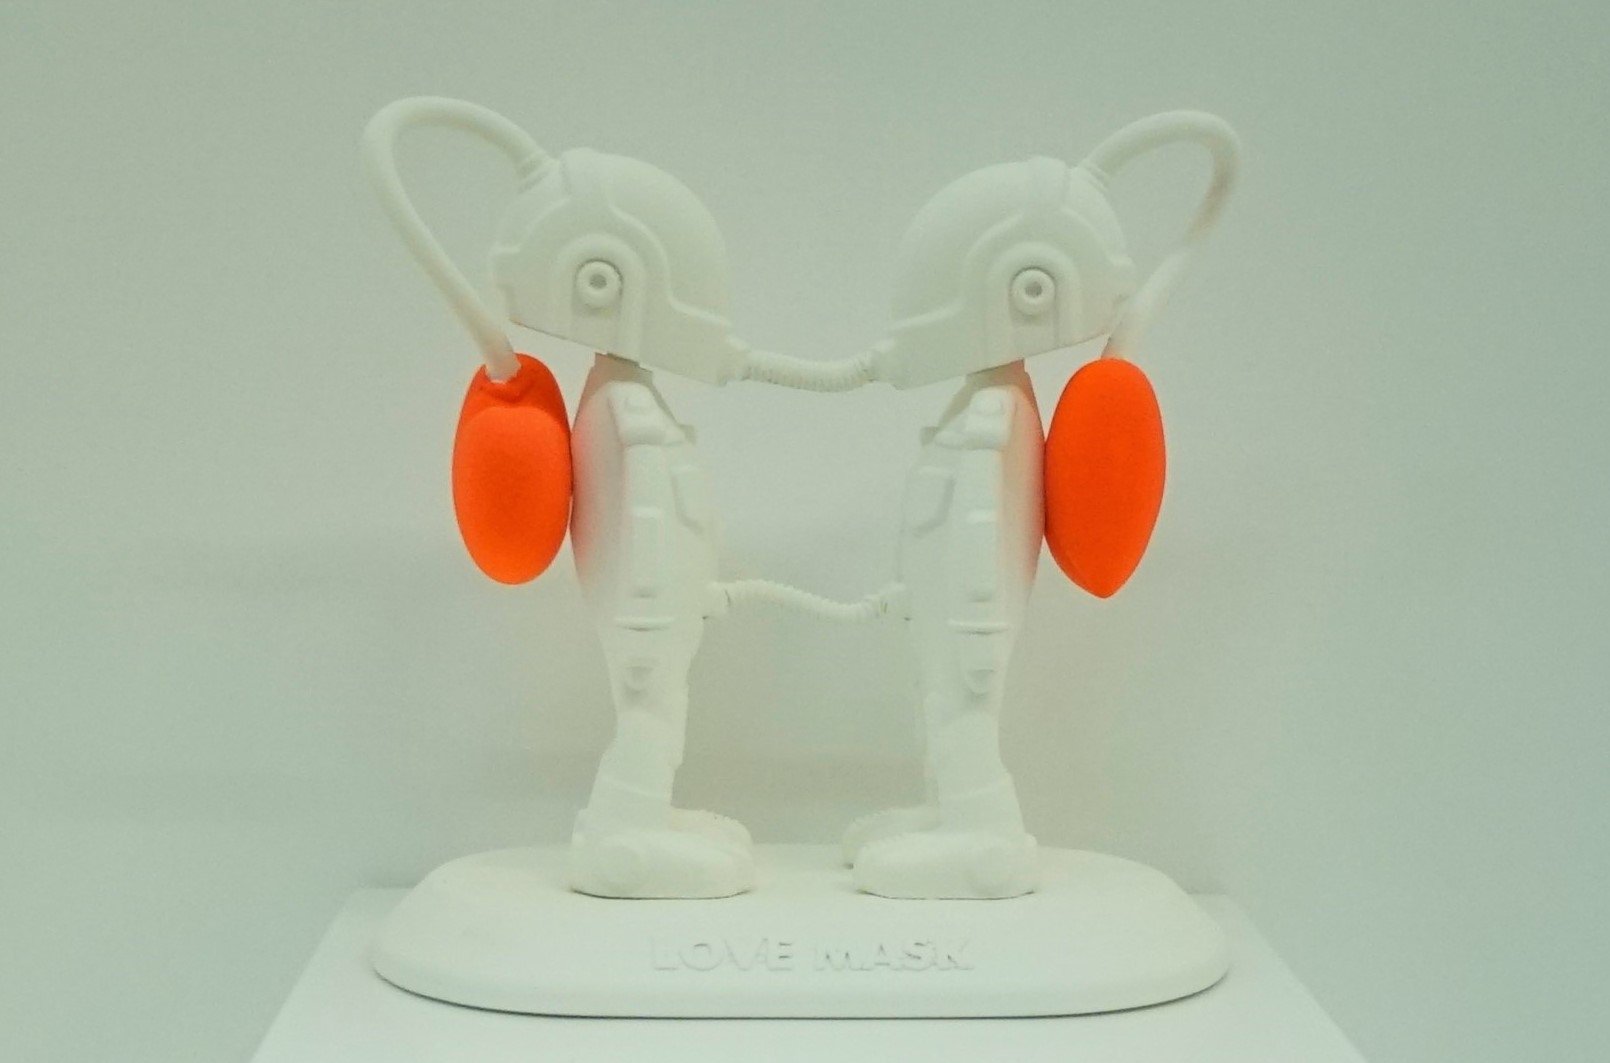 Aykut Erol, "Love Mask," sculpture on plastic 3D printing, 23.7 by 23 centimeters.